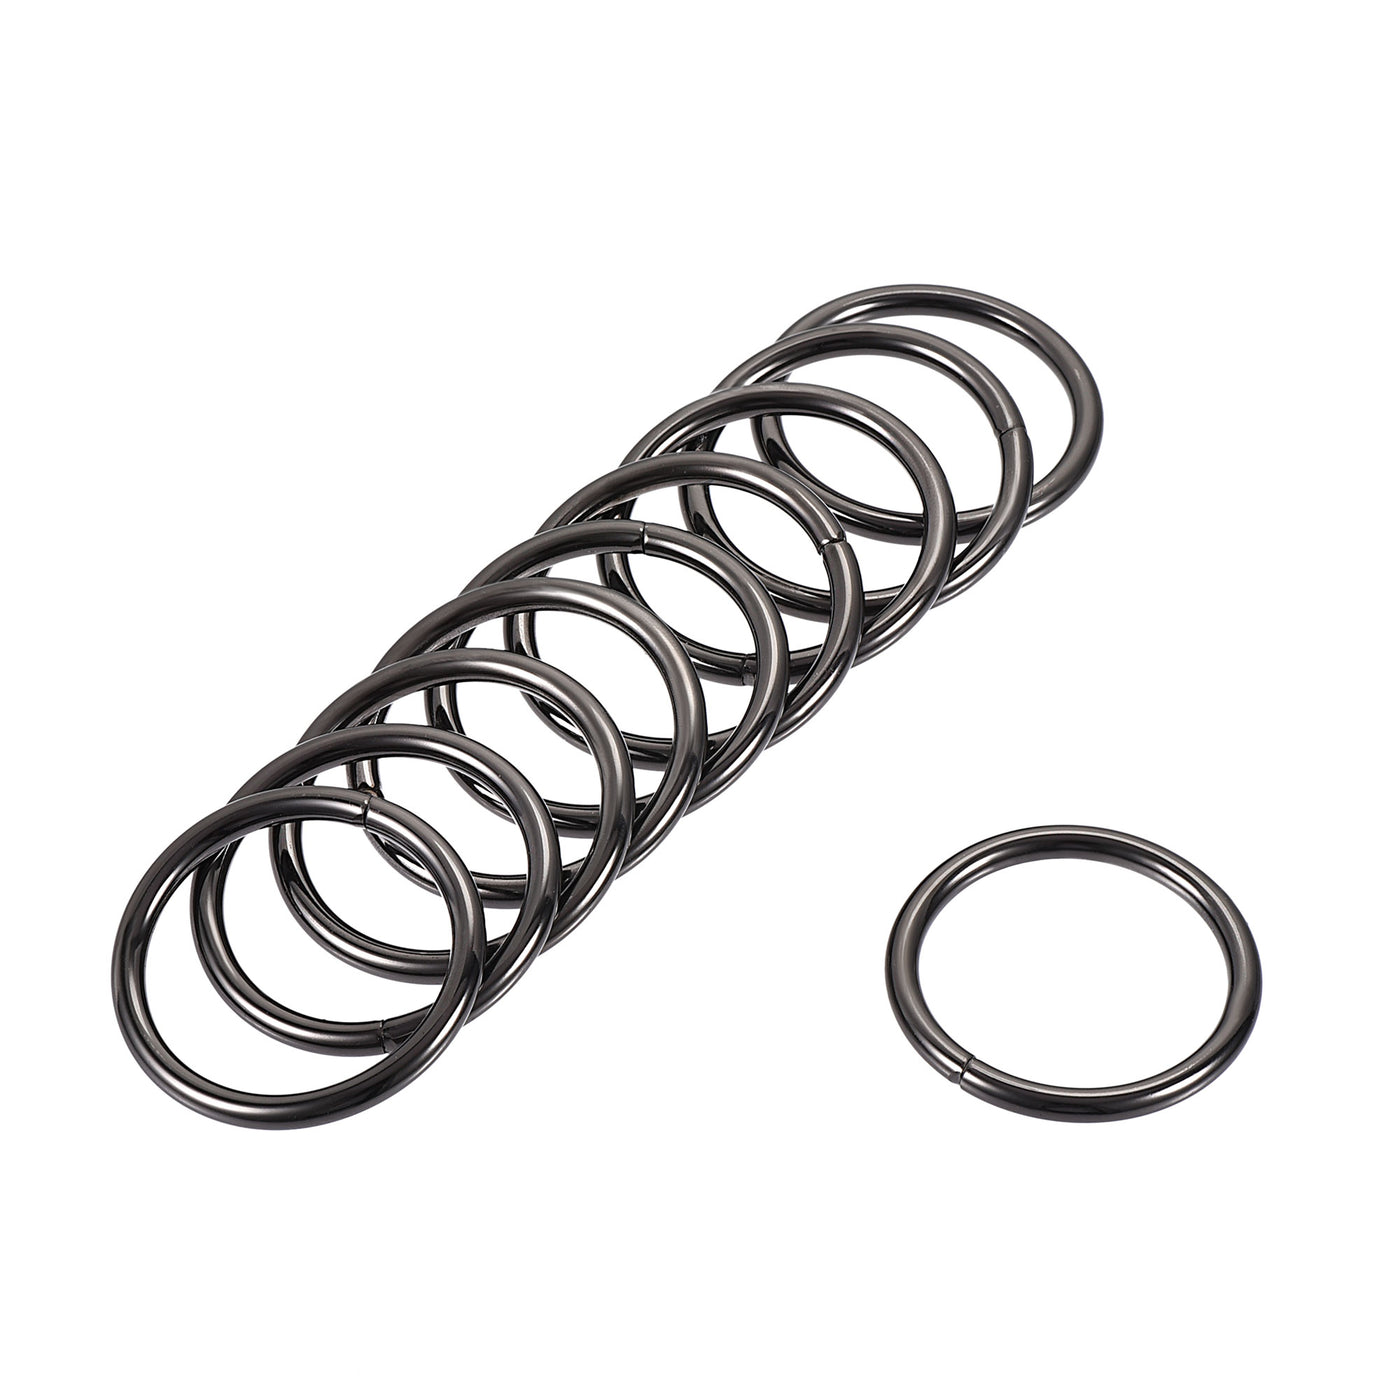 uxcell Uxcell Metal O Ring 32mm(1.26") ID 3.8mm Thickness Non-Welded Rings Black 15pcs